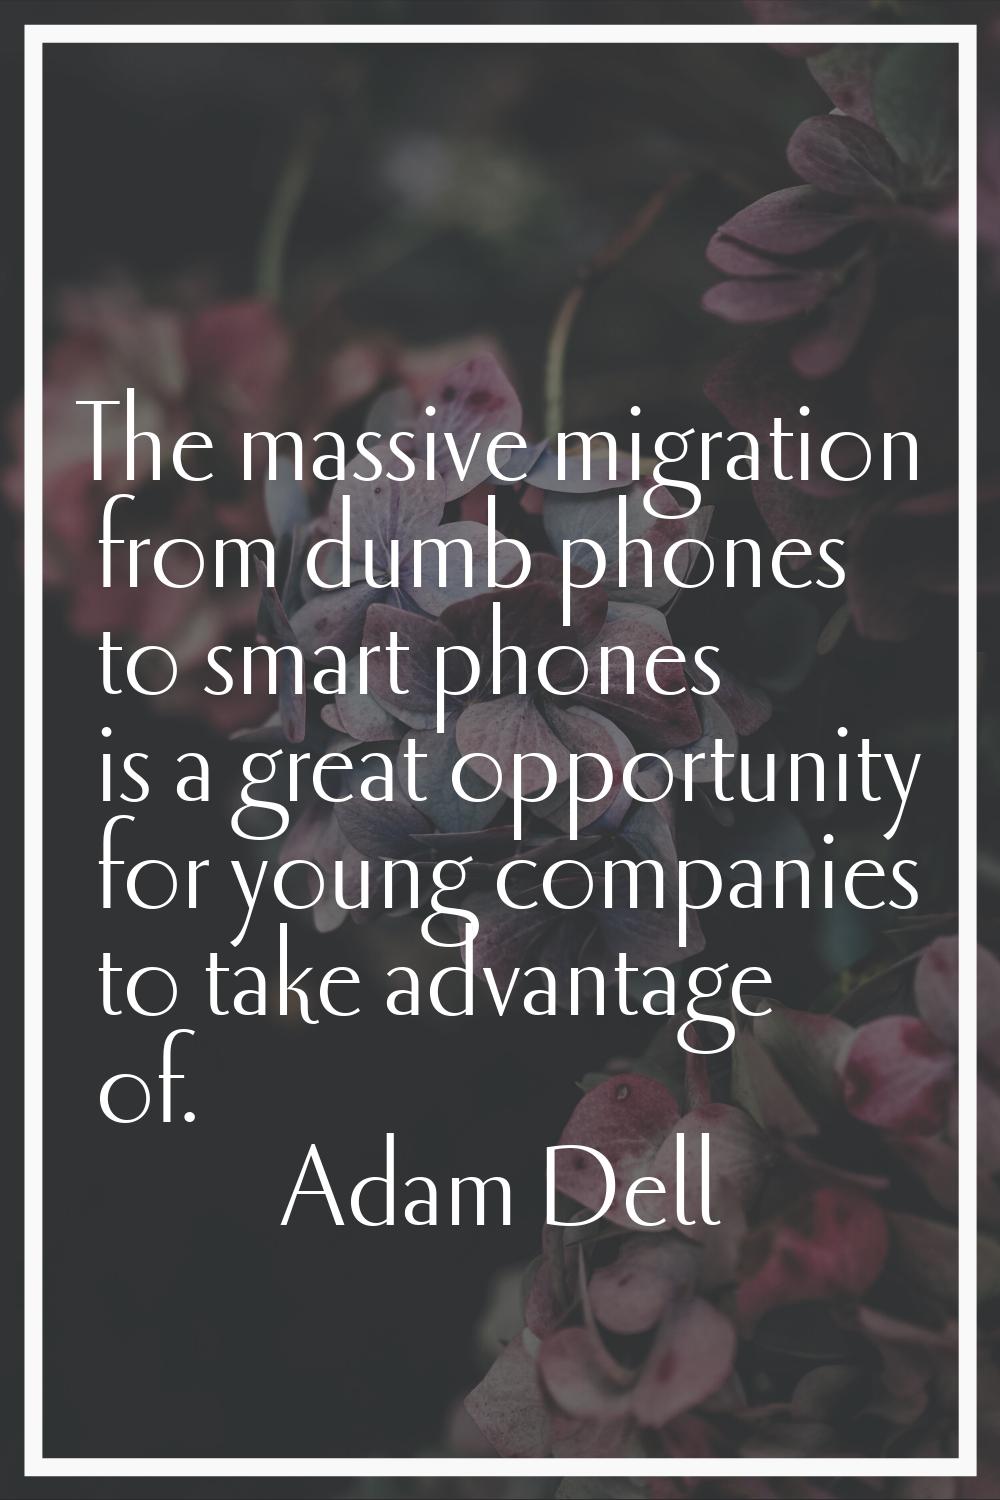 The massive migration from dumb phones to smart phones is a great opportunity for young companies t